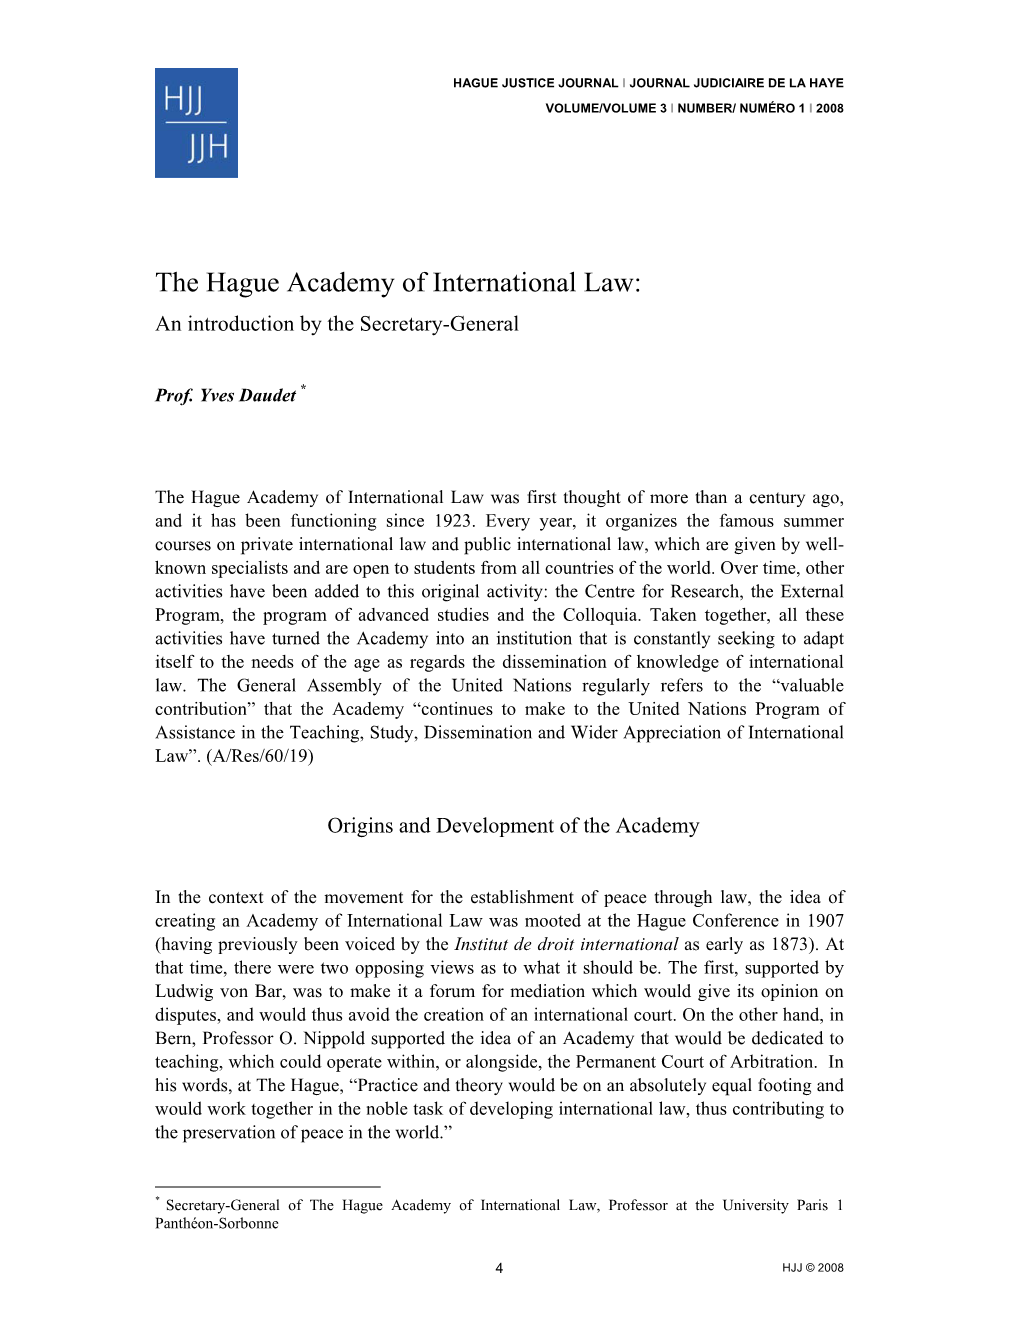 The Hague Academy of International Law: an Introduction by the Secretary-General